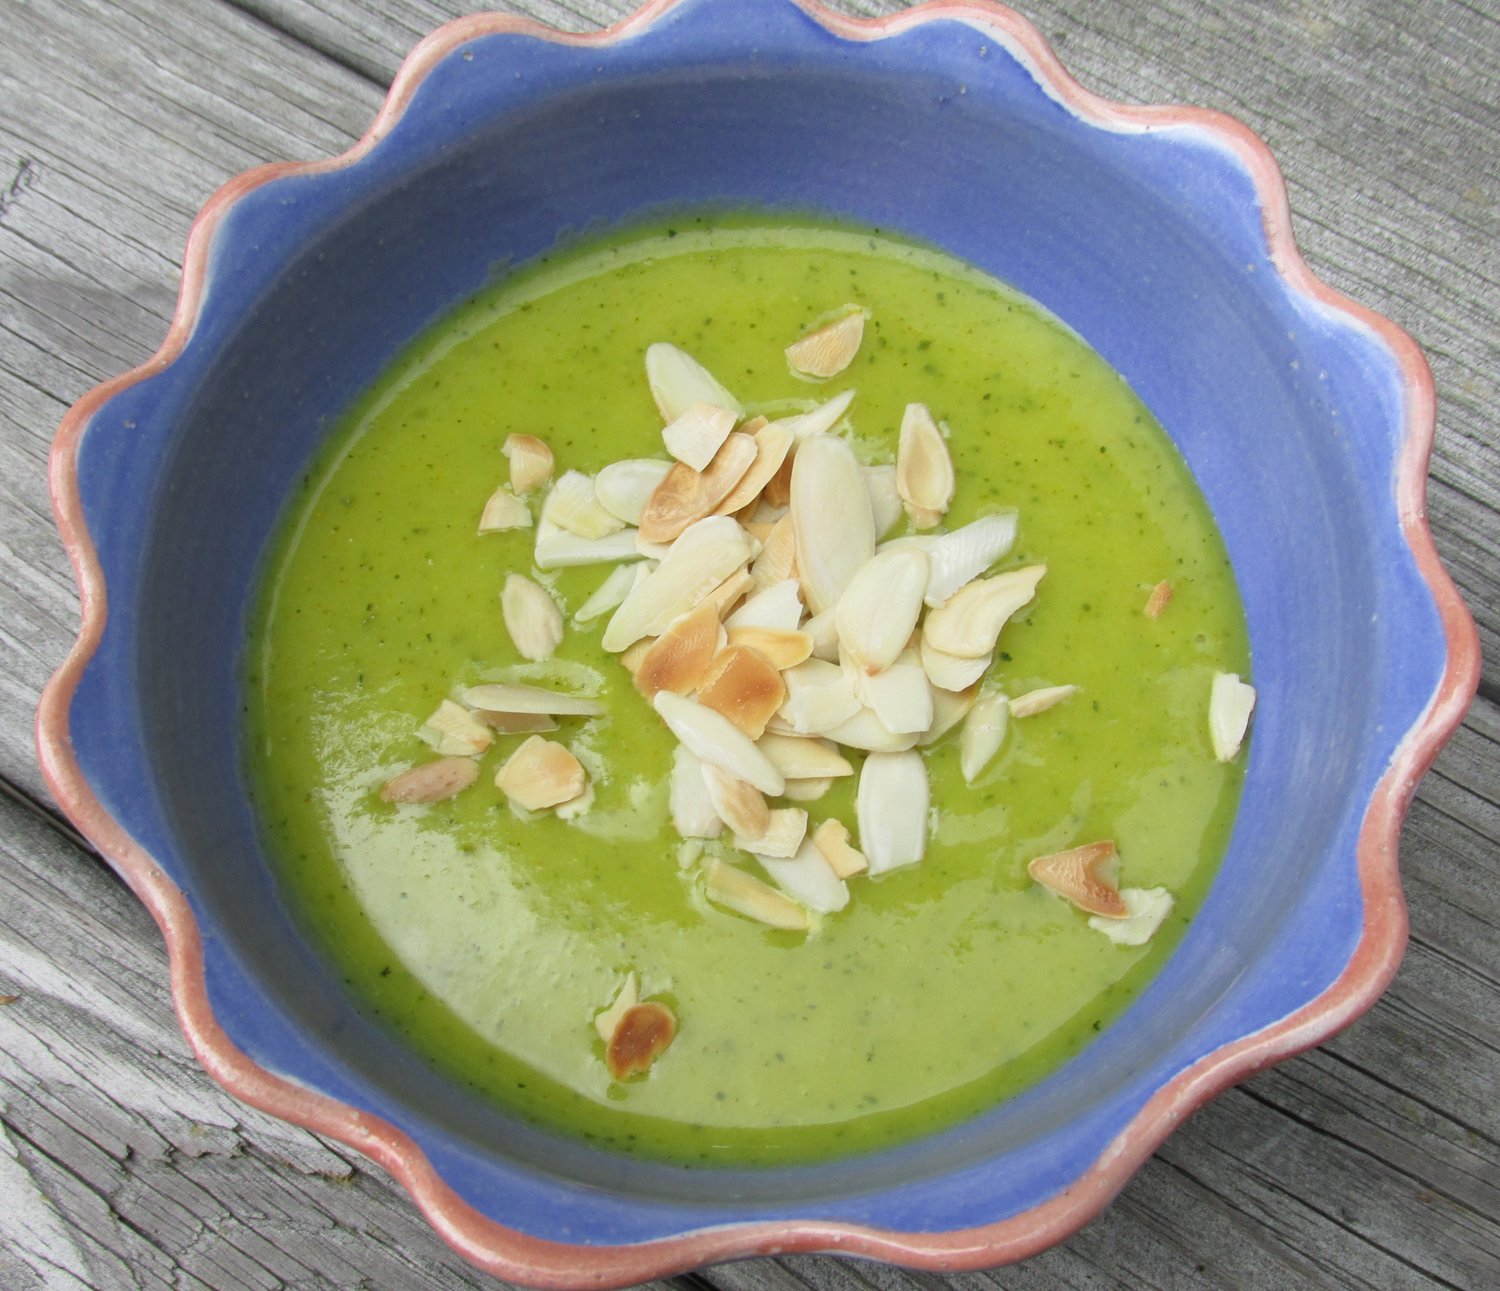 Cold zucchini soup with curry, garnished with toasted silvered almonds.